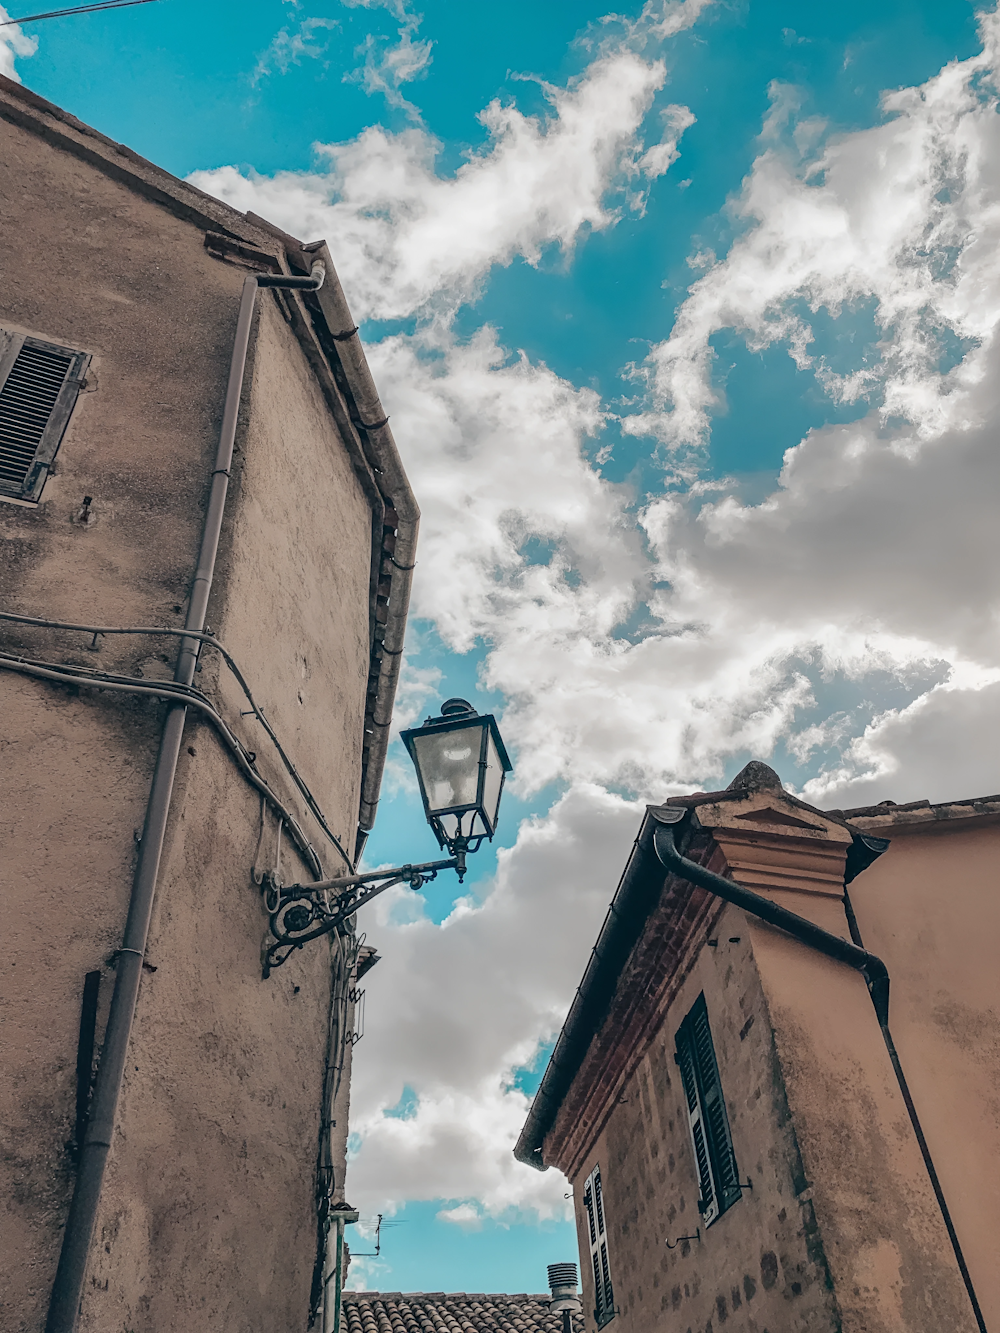 a street light and buildings under a cloudy sky